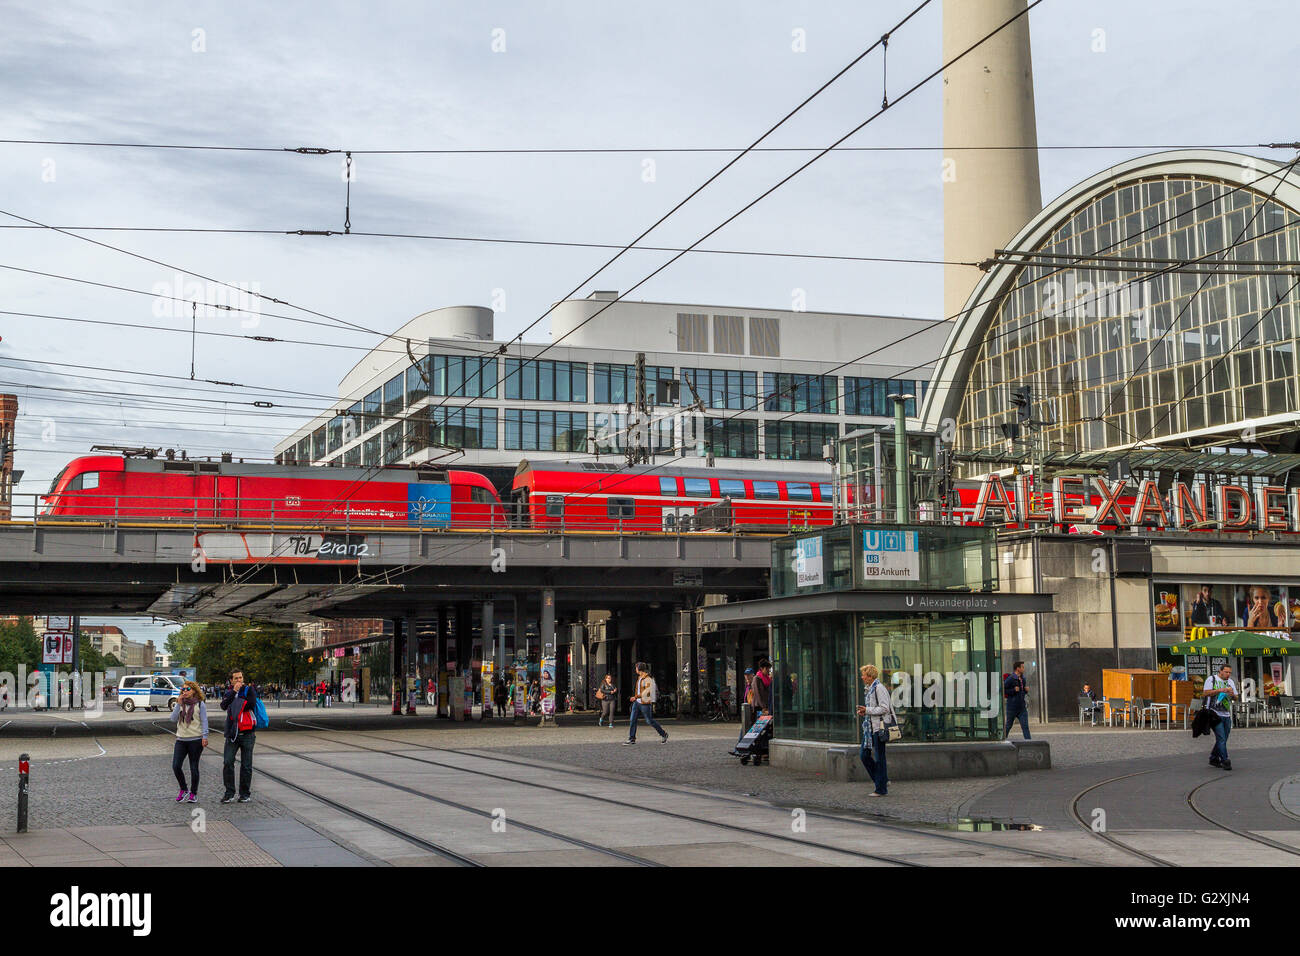 A train crossing a rail bridge at Berlin Alexanderplatz station in the Mitte district of Berlin, Germany Stock Photo